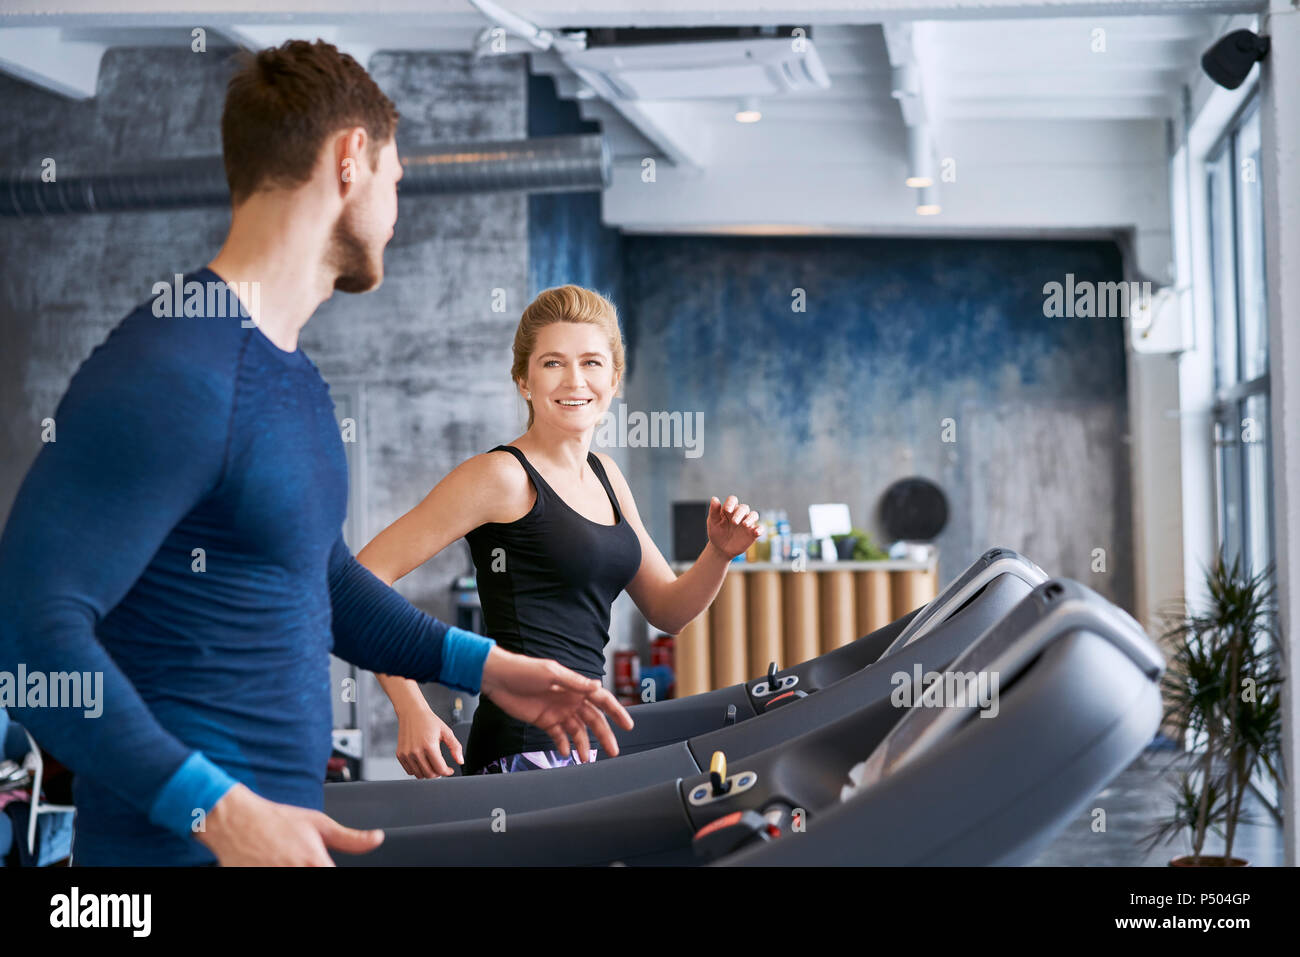 Man and woman talking during treadmill exercise at gym Stock Photo